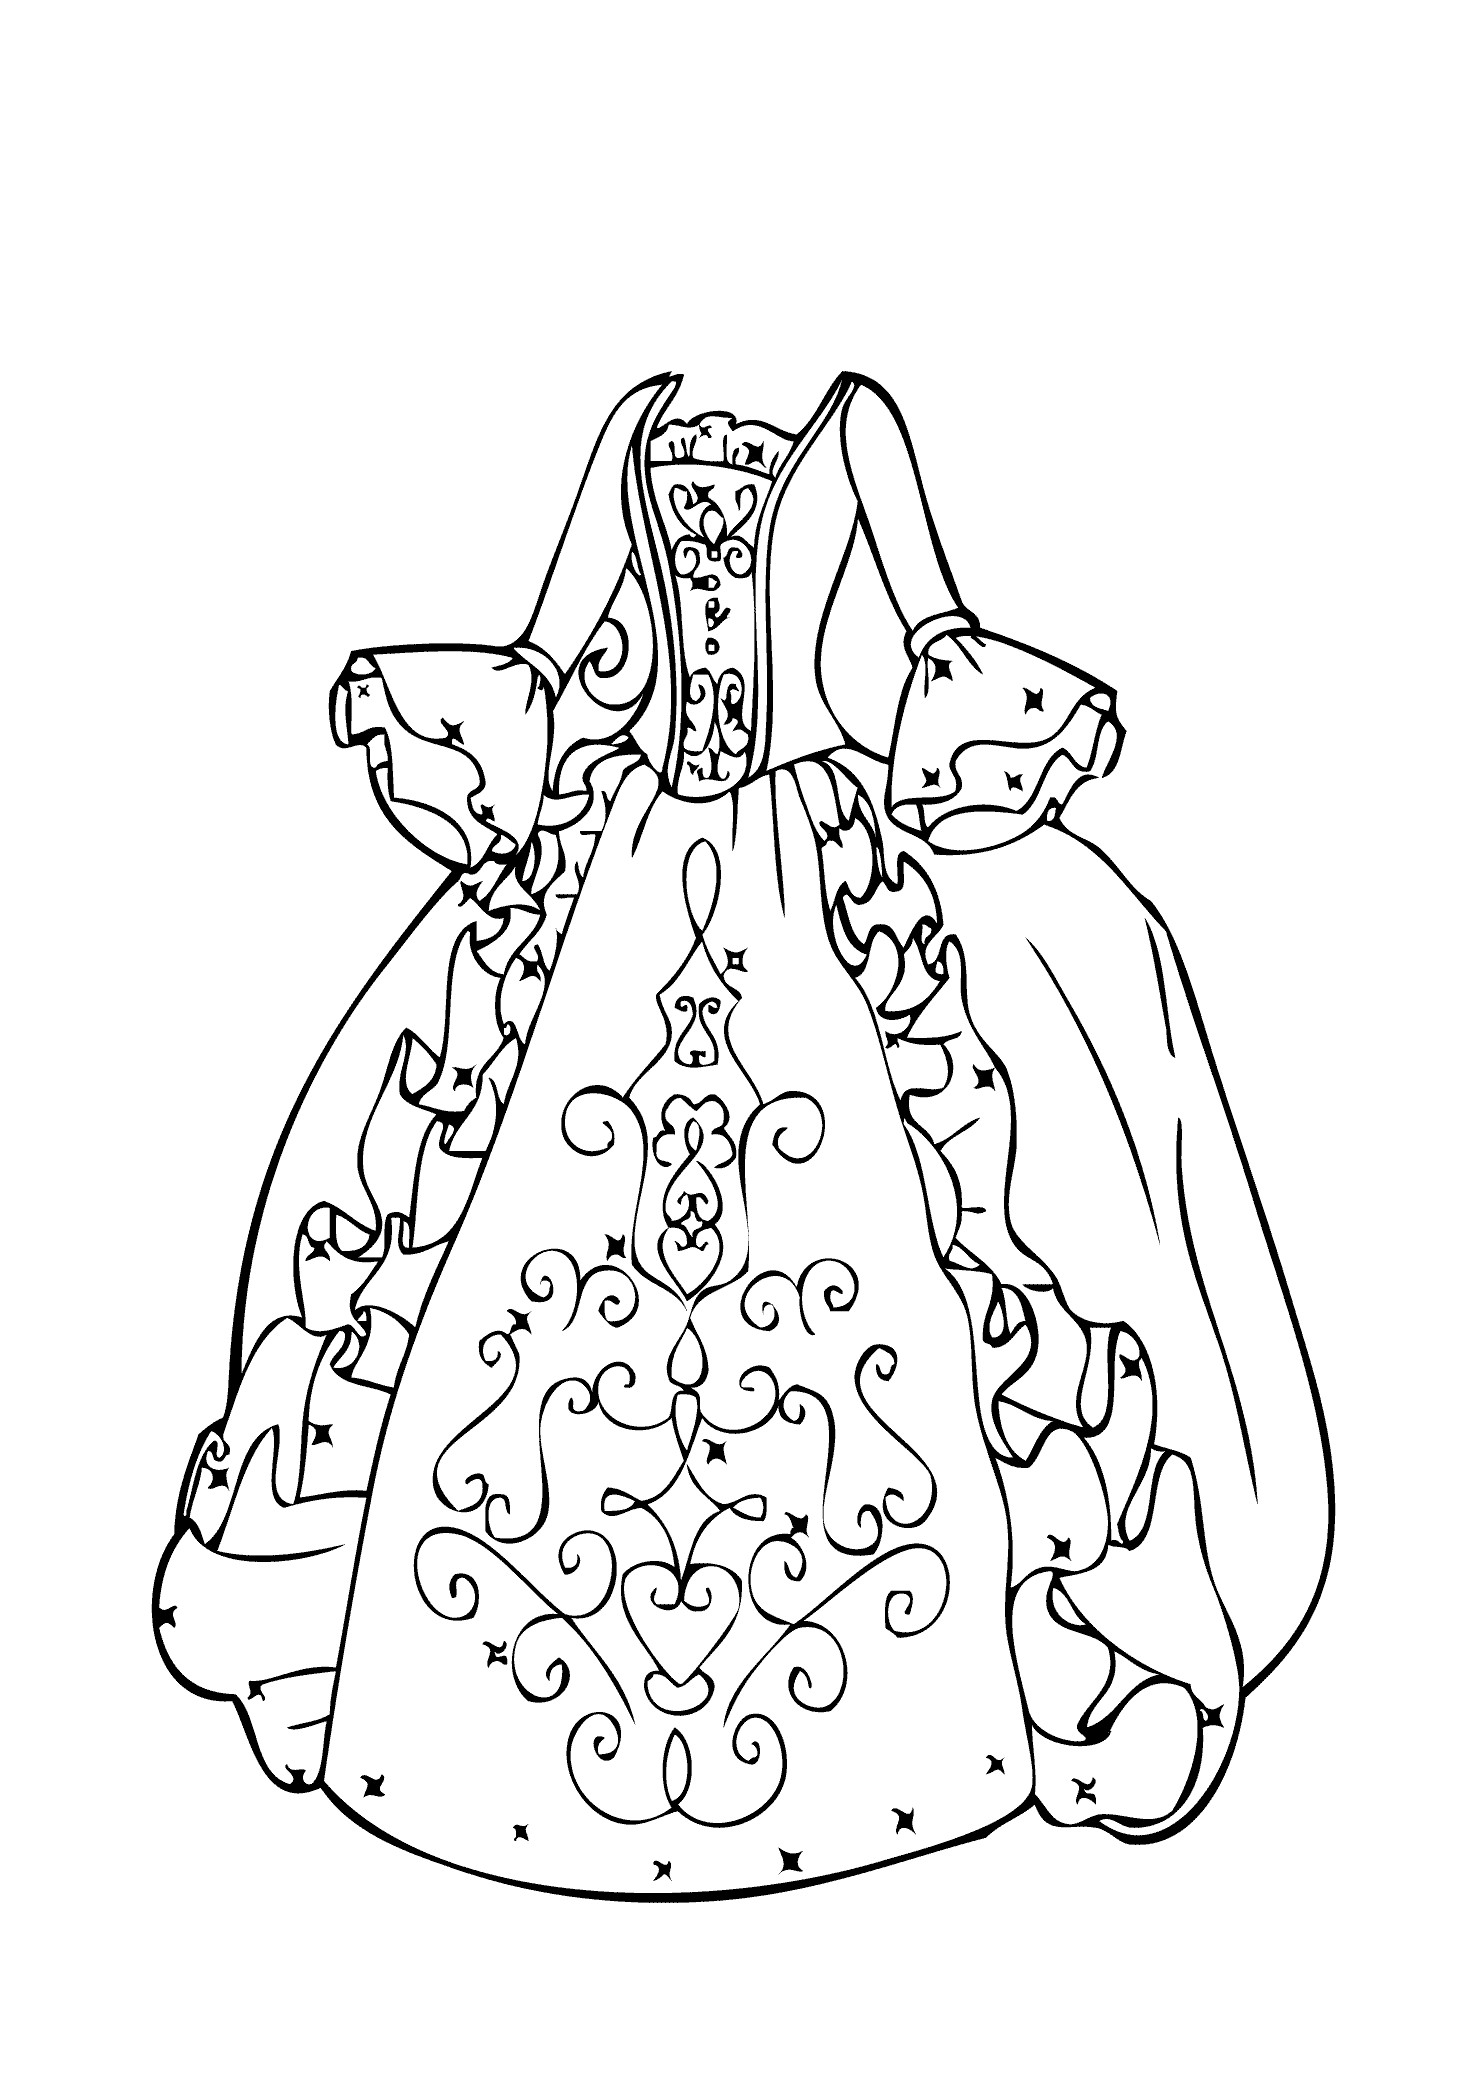 Online Coloring Sheets For Girls
 43 Best Free Coloring Pages for Girls Gianfreda